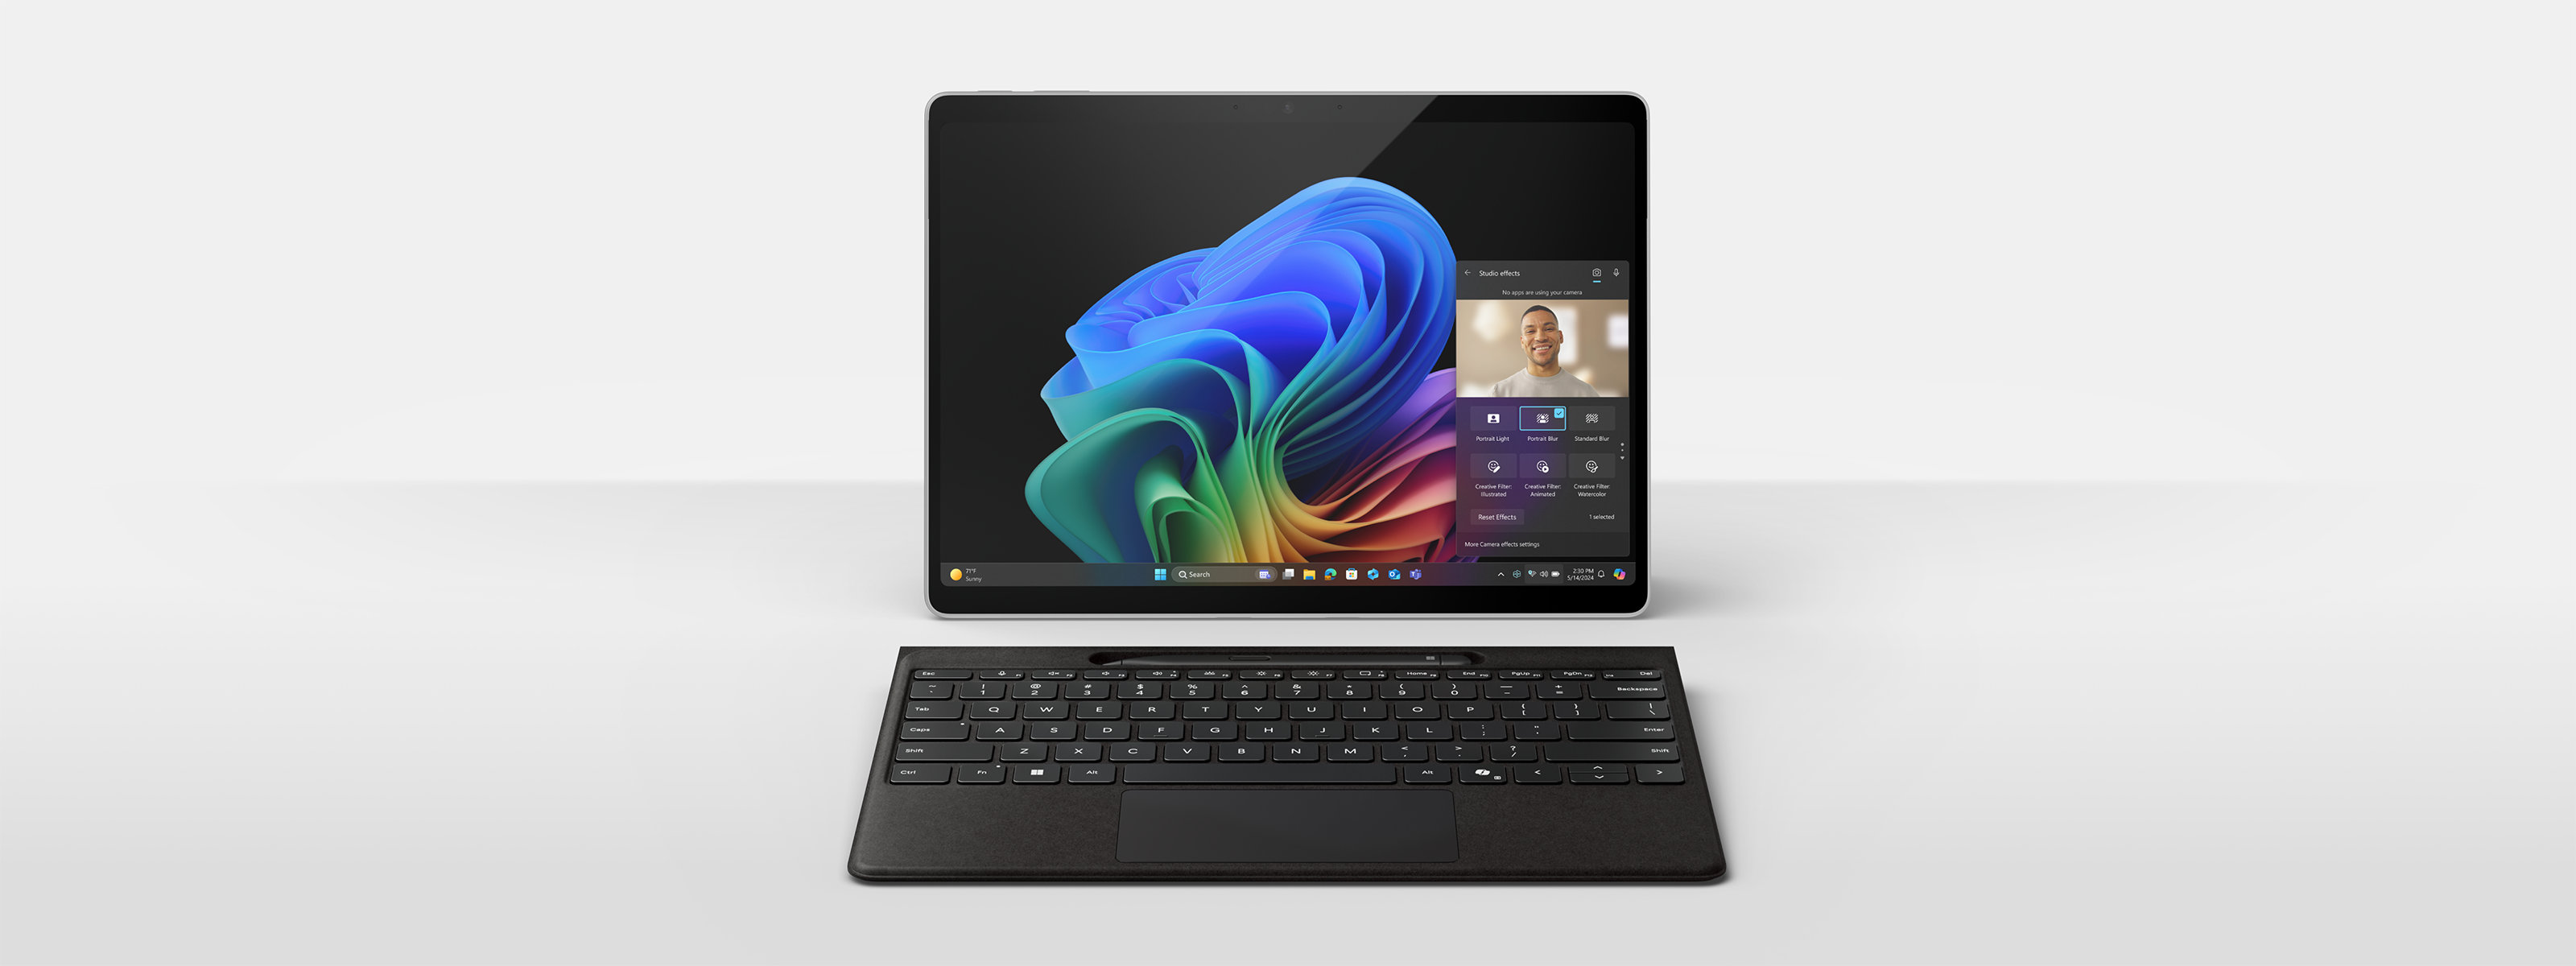 An image of the Surface Pro device utilizing the camera